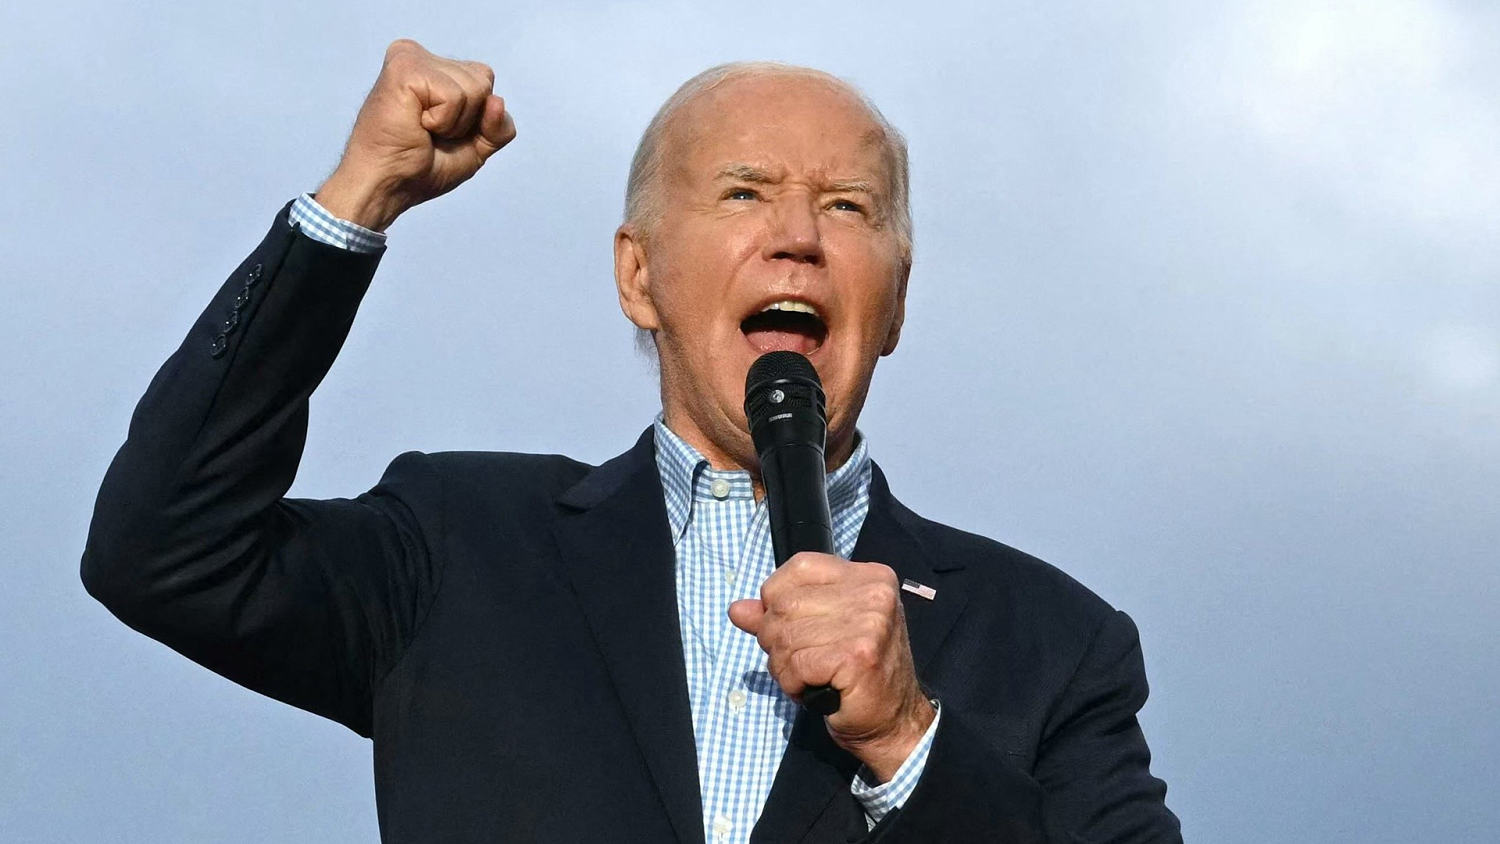 Biden insists he’s staying in the 2024 race: ‘I’m not going anywhere’